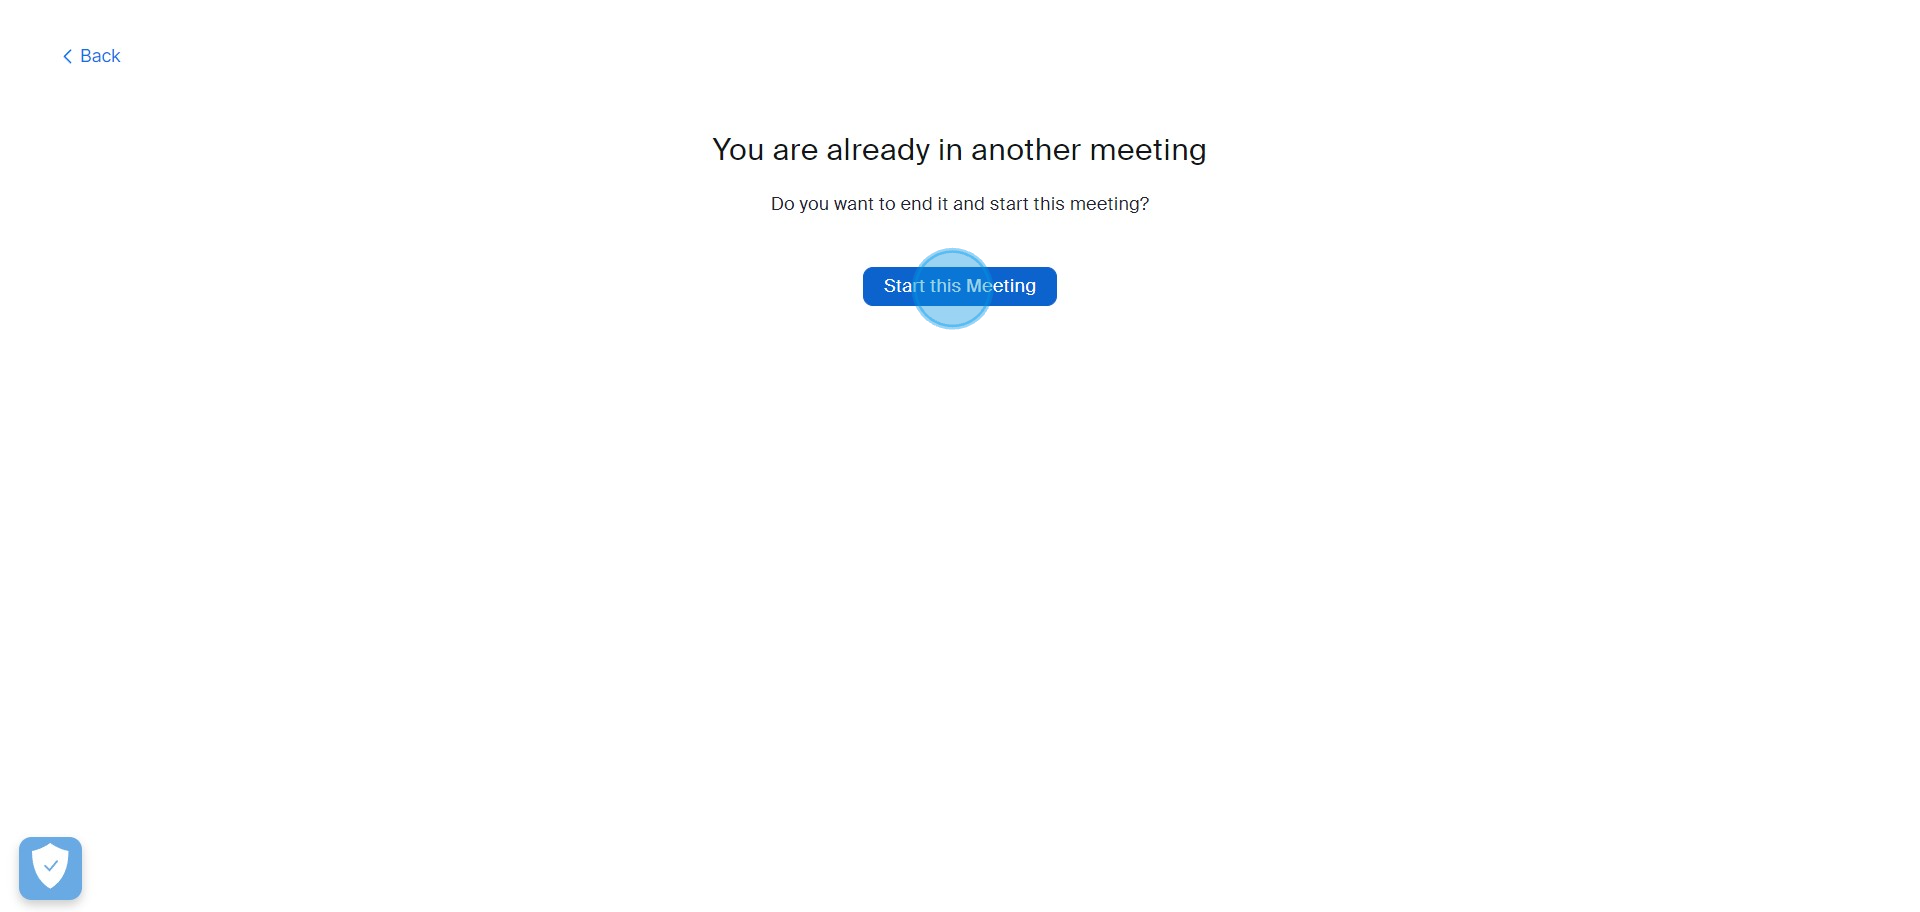 5 Click on "Start this Meeting"